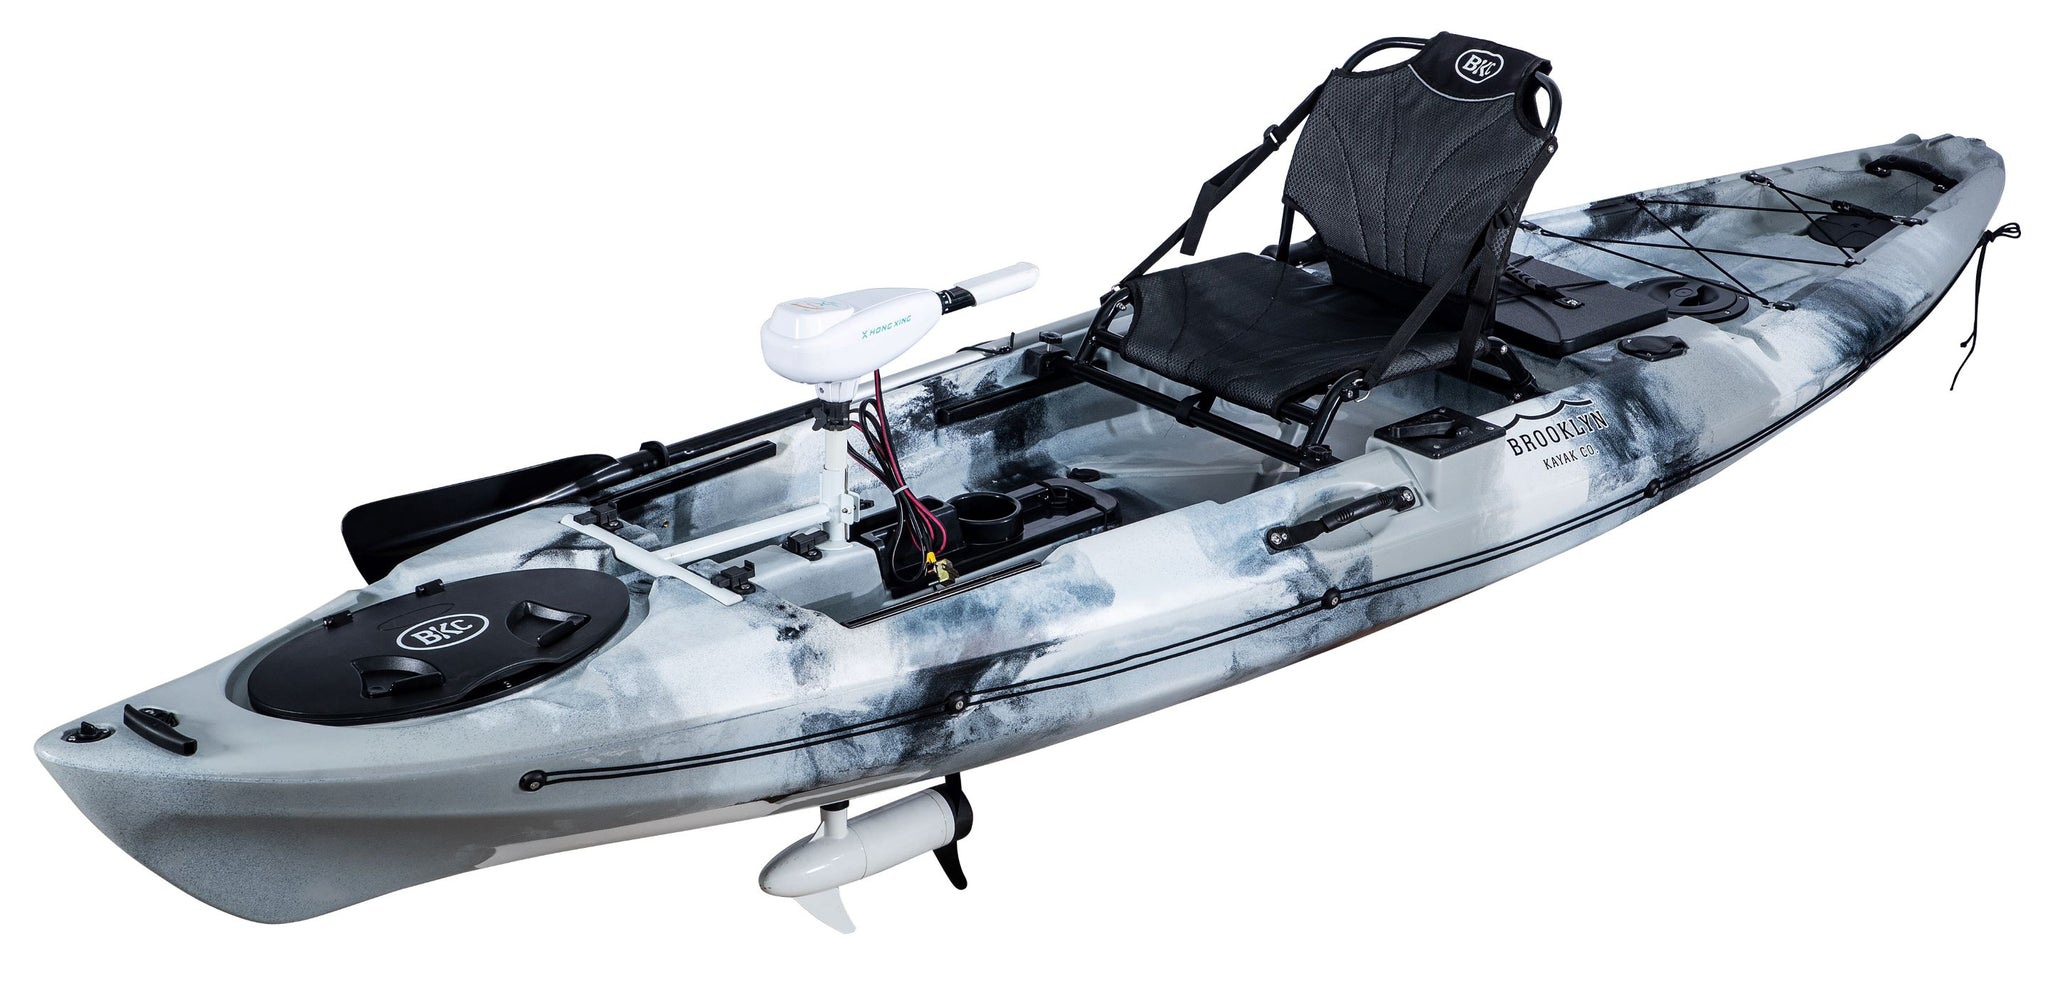 Quality Aluminum Adjustable Seating Platform for inflatable boats